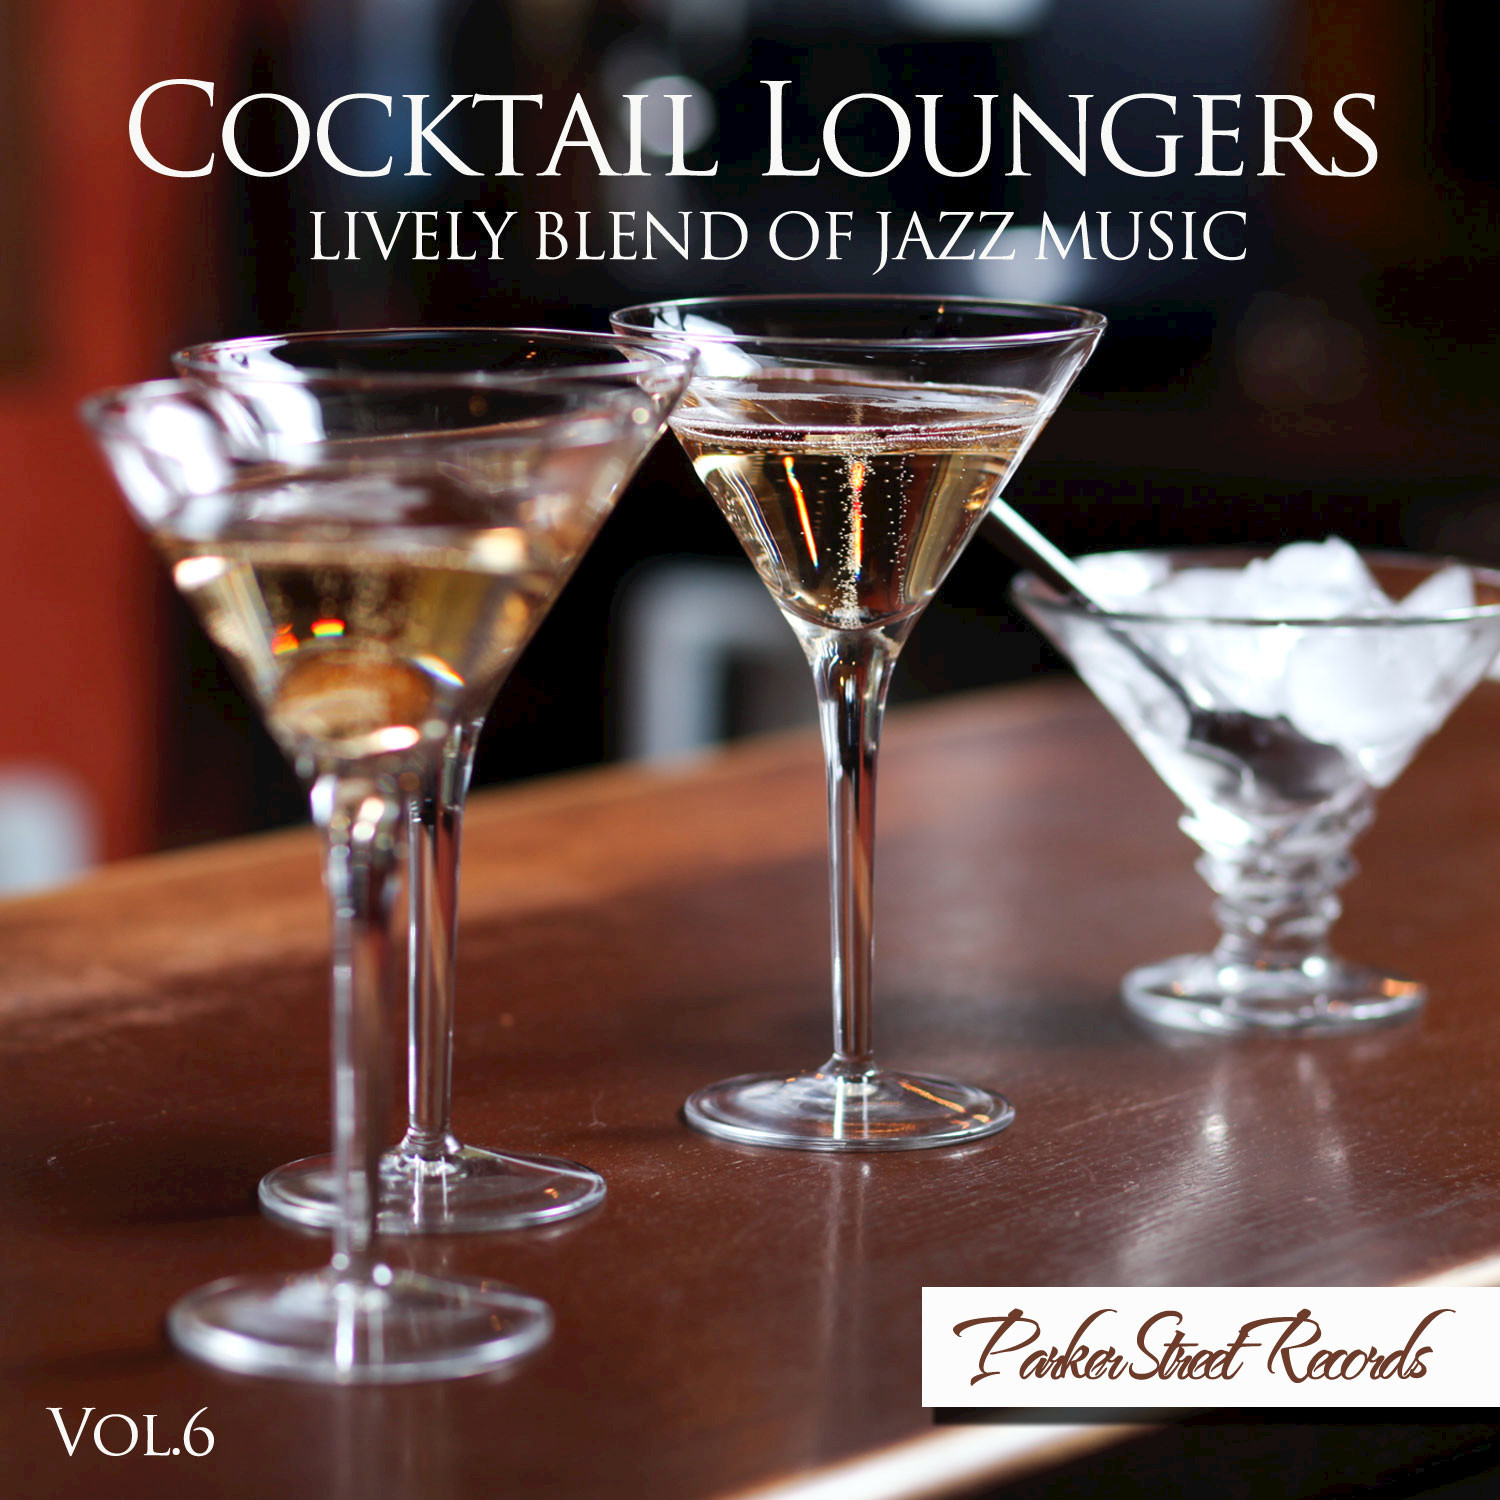 Cocktail Loungers, Vol. 6